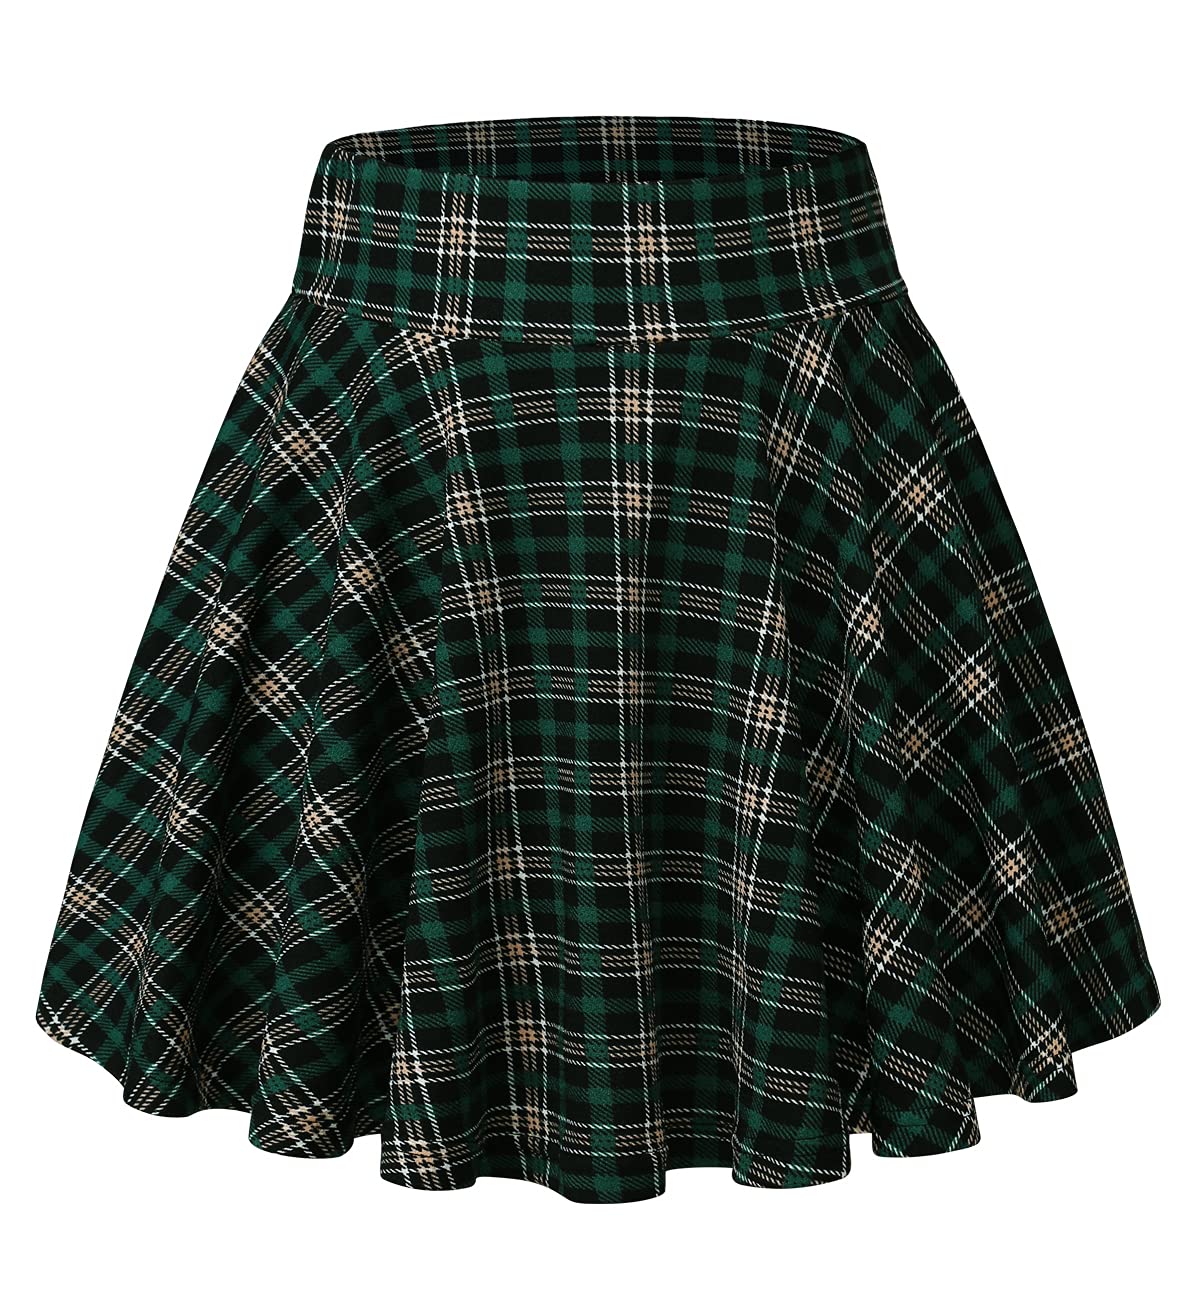 DJT Flared Pleated Green Plaid Women's Casual Stretchy Mini Skater Skirt with Shorts